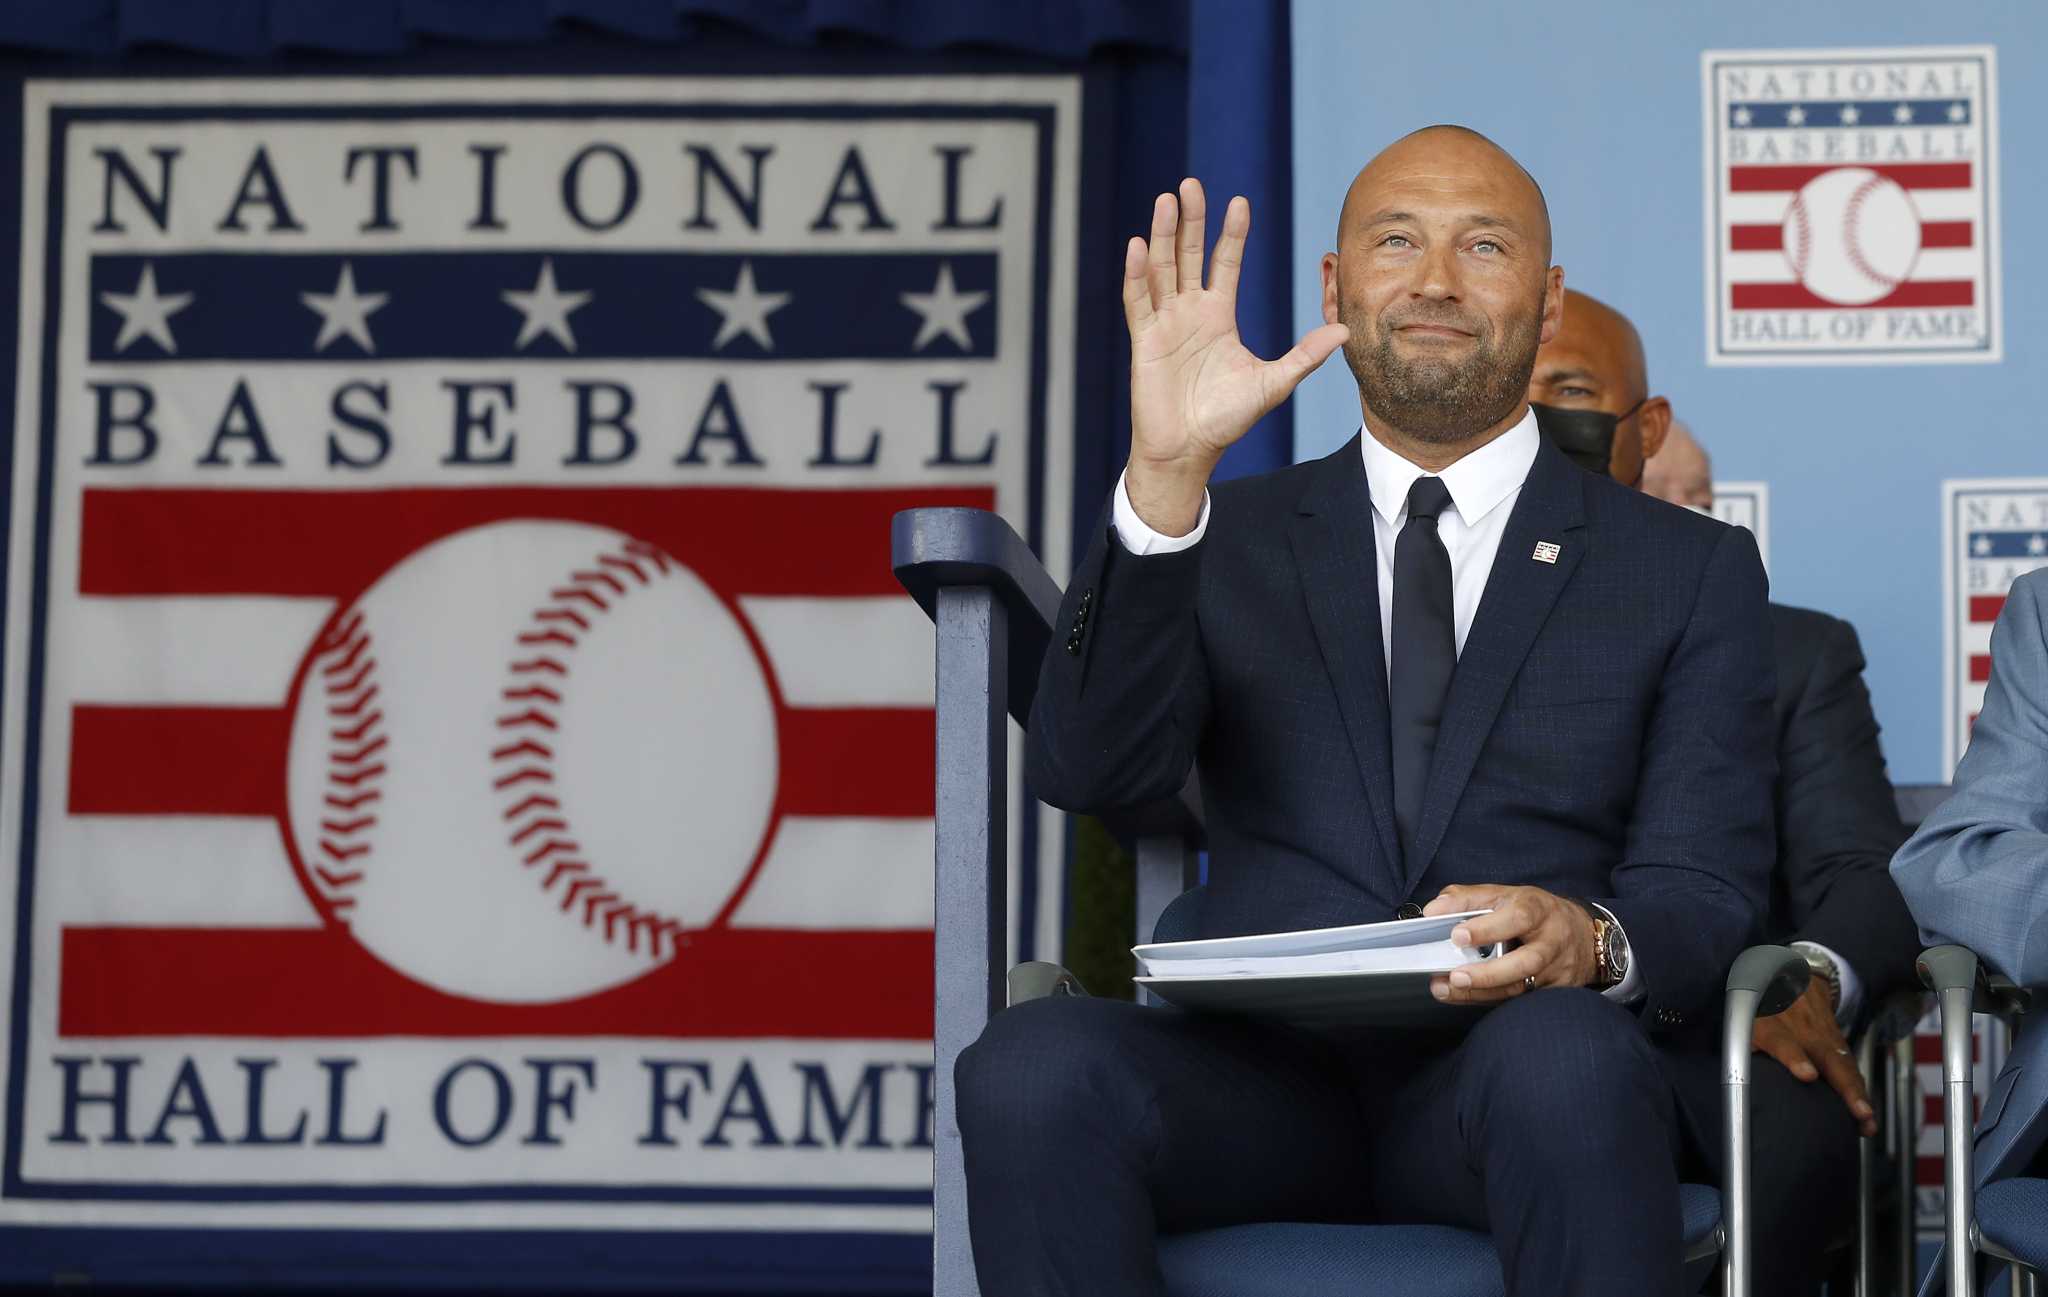 Derek Jeter leads induction class for the National Baseball Hall of Fame